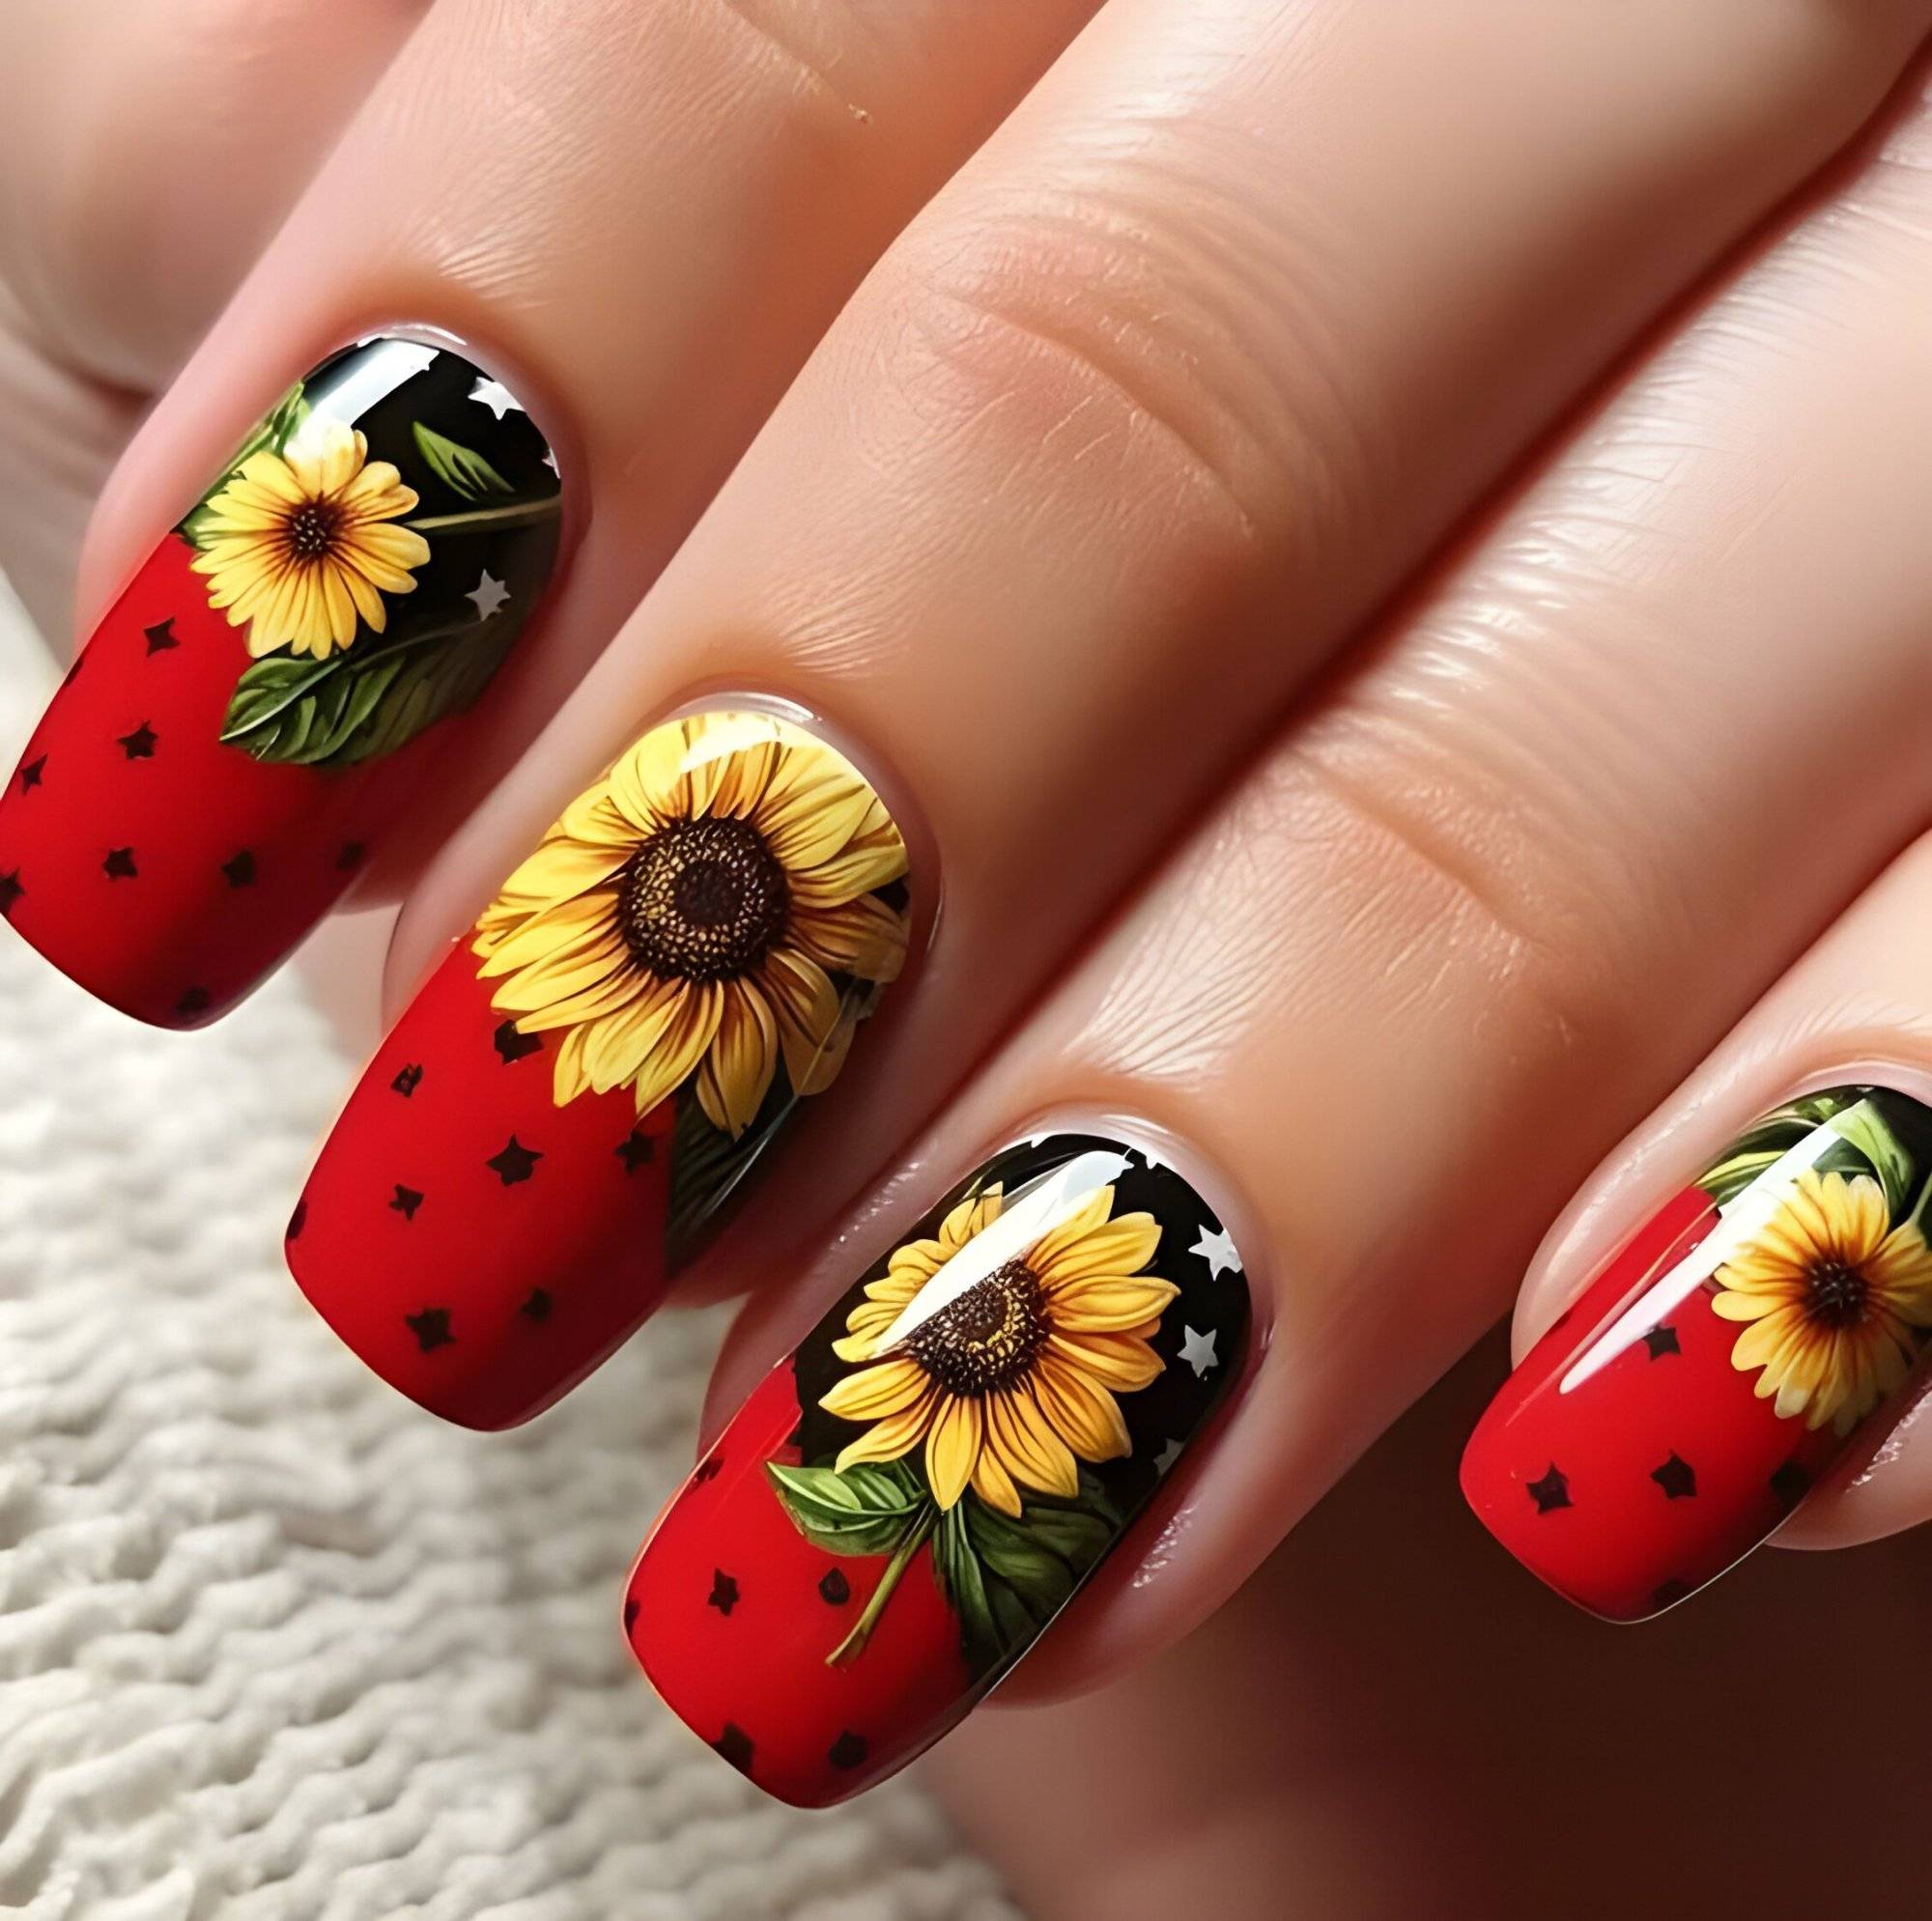 25 Trendy Summer Sunflower Nails For Beginners To Copy ASAP - 169